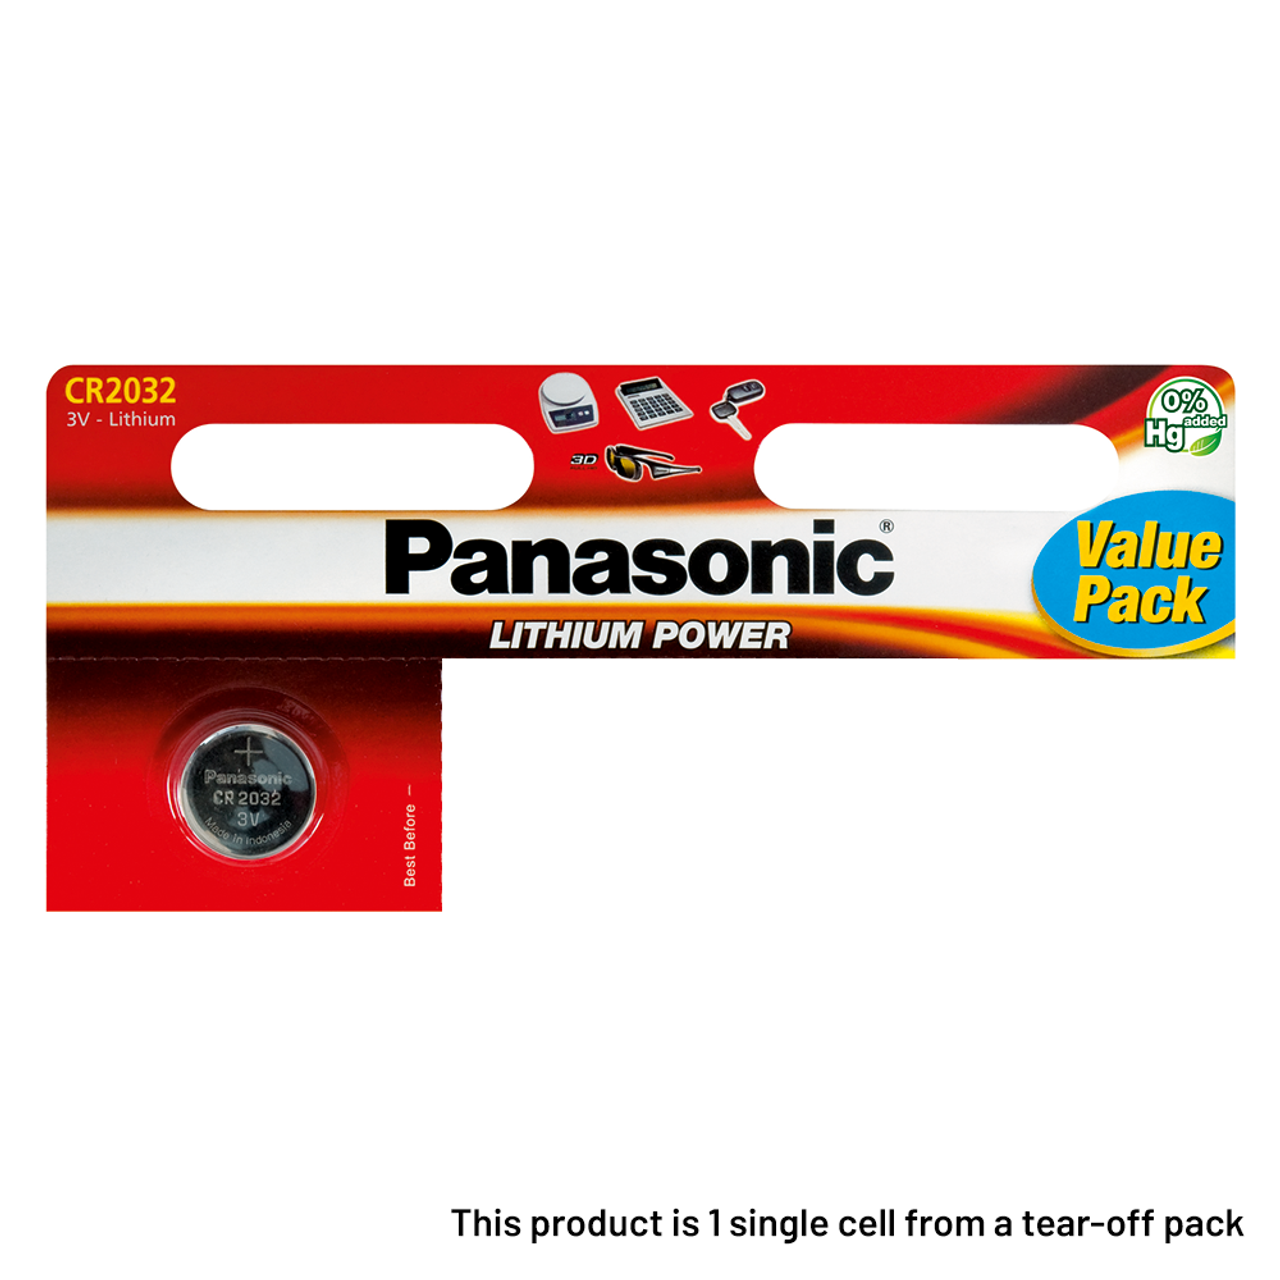 Panasonic CR2032 Coin Cell Battery (1 Pack)